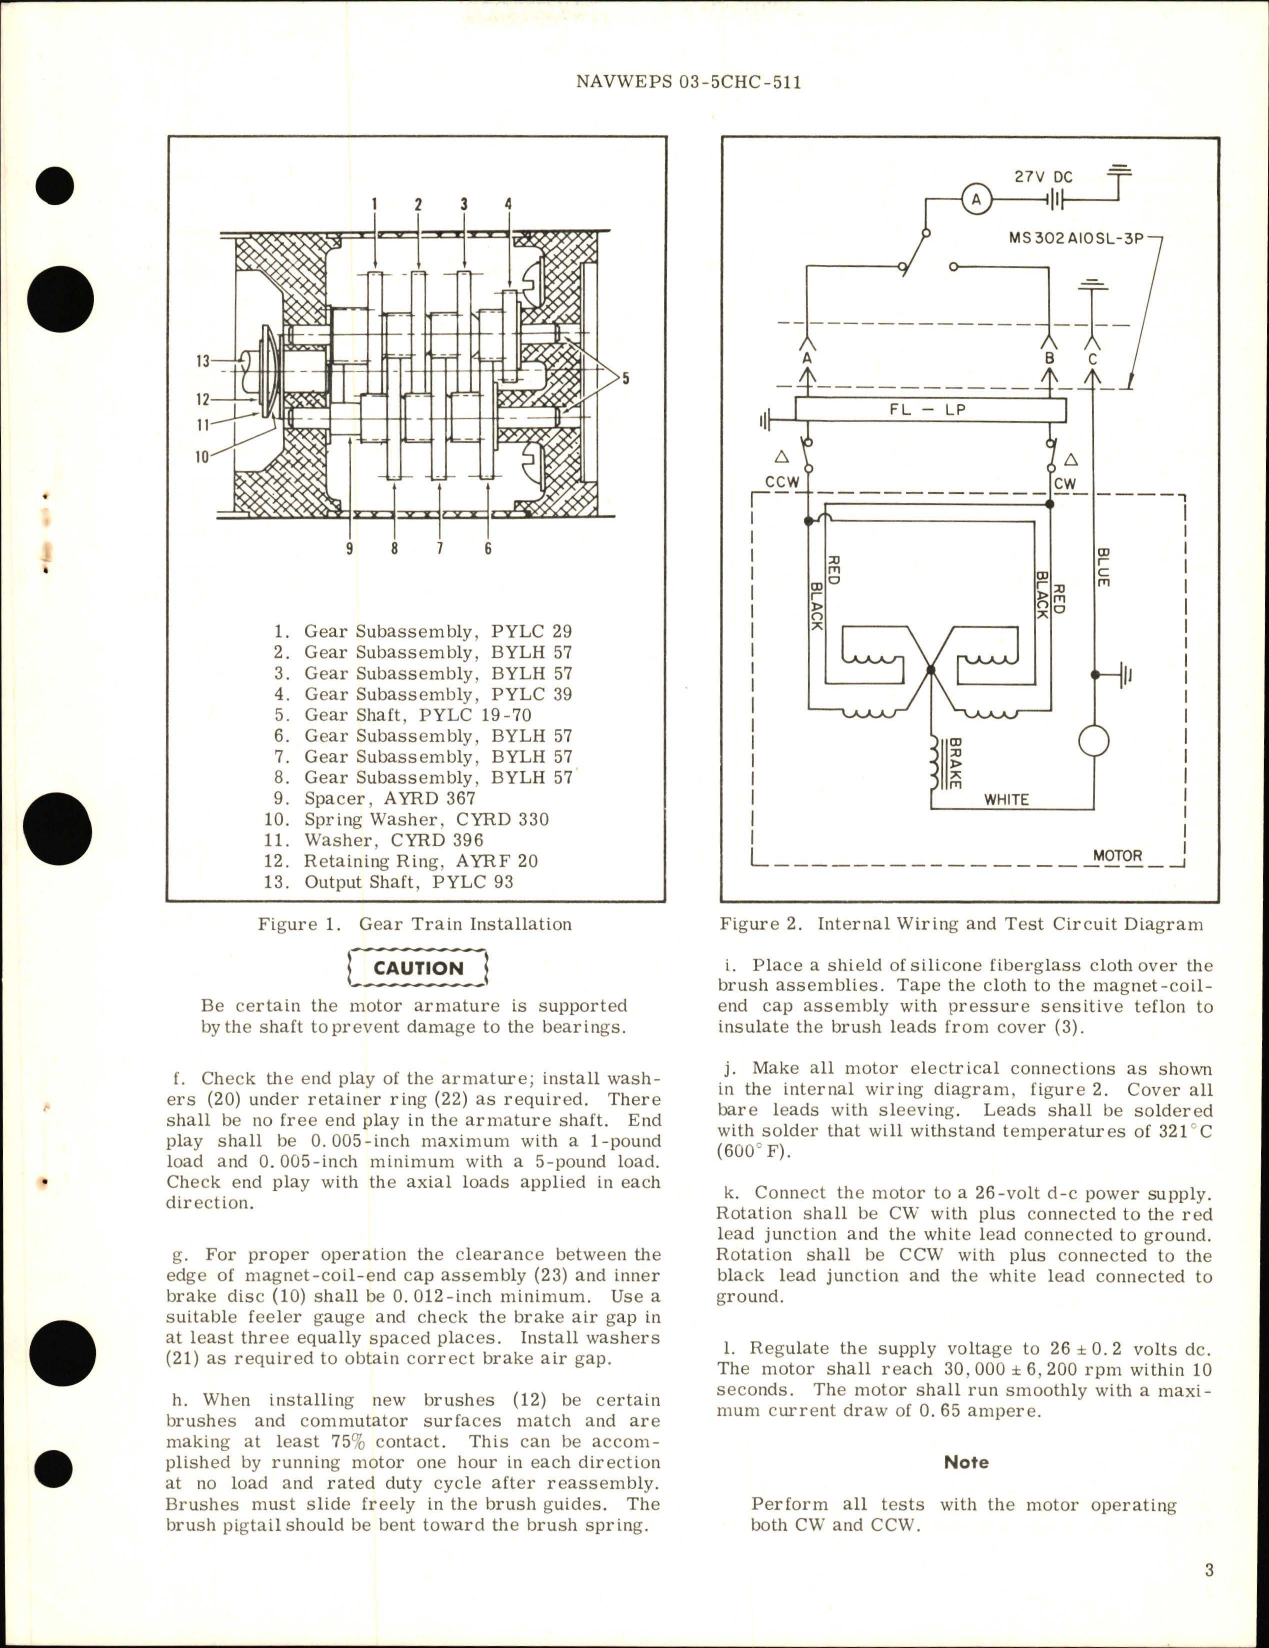 Sample page 5 from AirCorps Library document: Overhaul Instructions with Illustrated Parts Breakdown for Valve and Actuator Assembly - Part DYLZ 5478